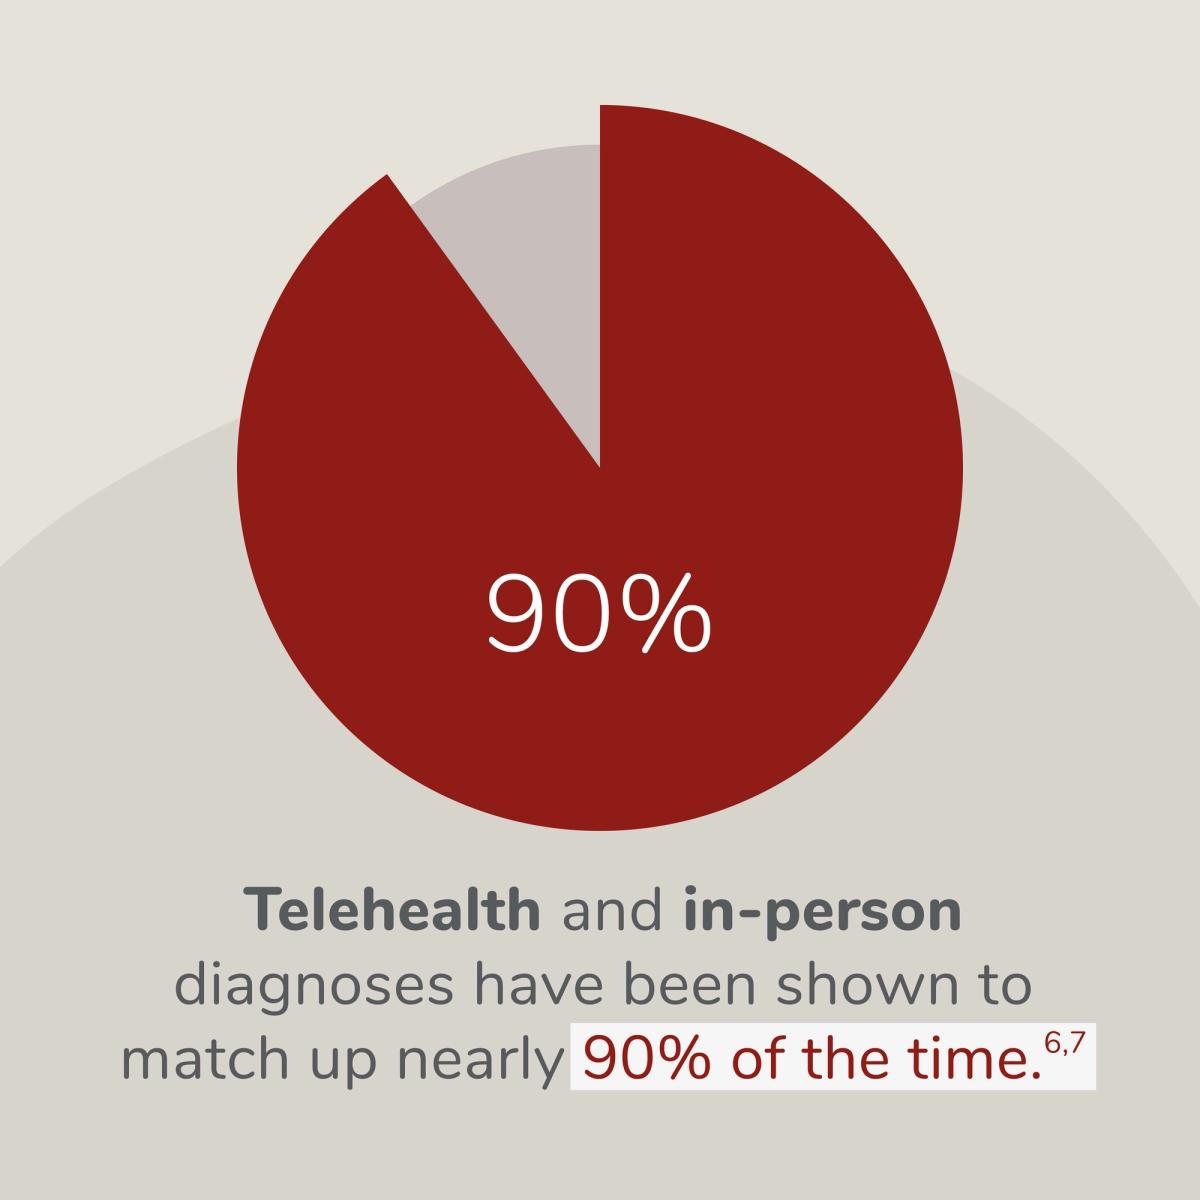 Pie Chart showing relationship between Telehealth and in-person diagnoses. 